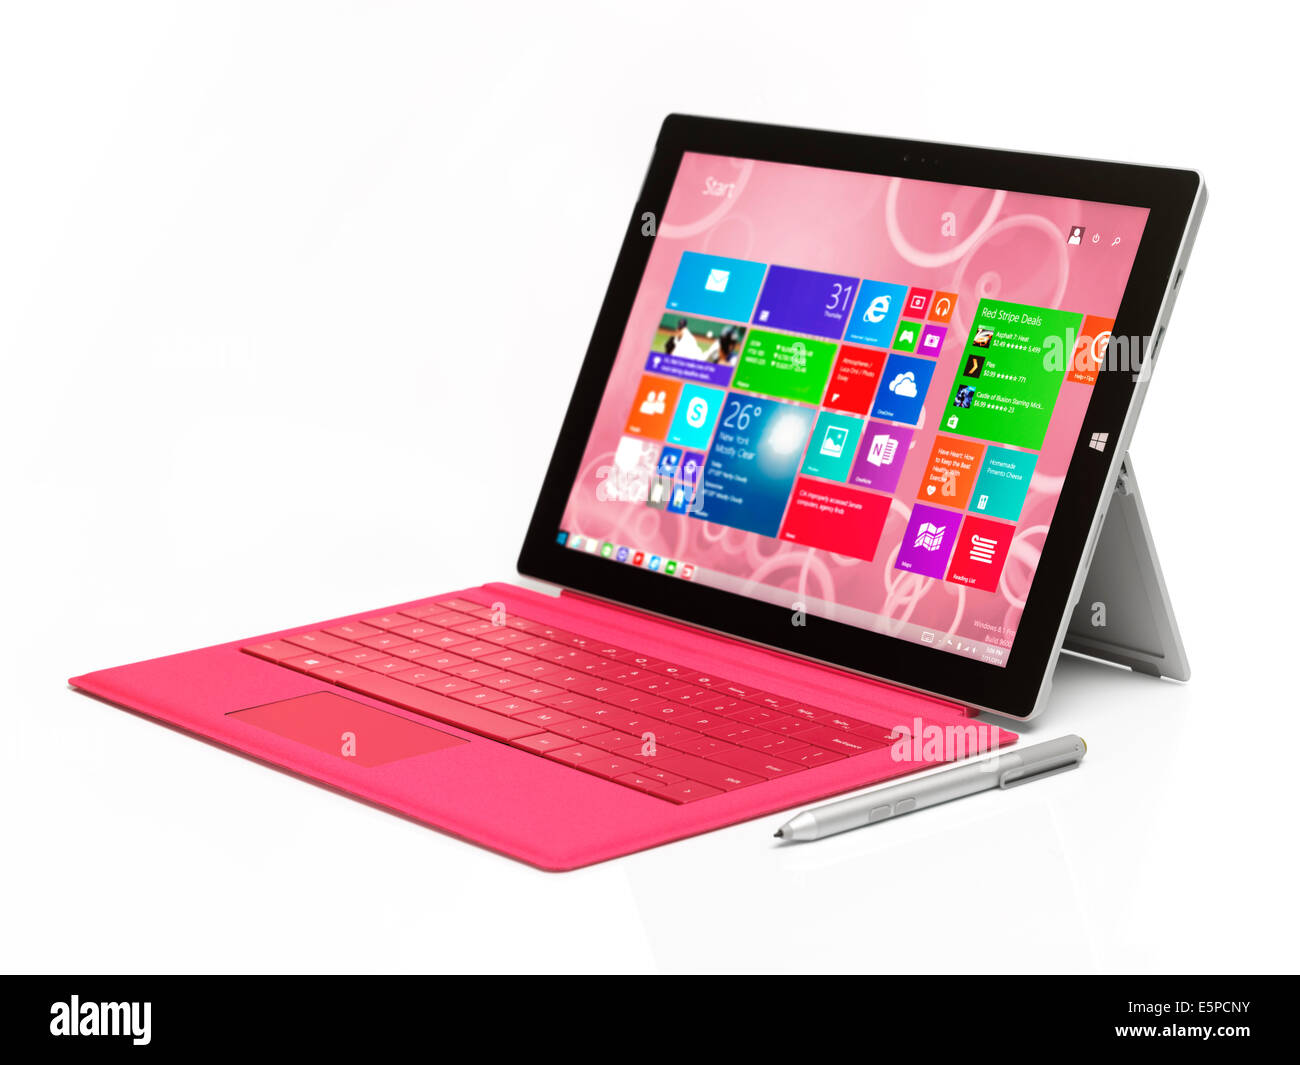 Microsoft Surface Pro 3 tablet computer with pink keyboard isolated on  white background Stock Photo - Alamy